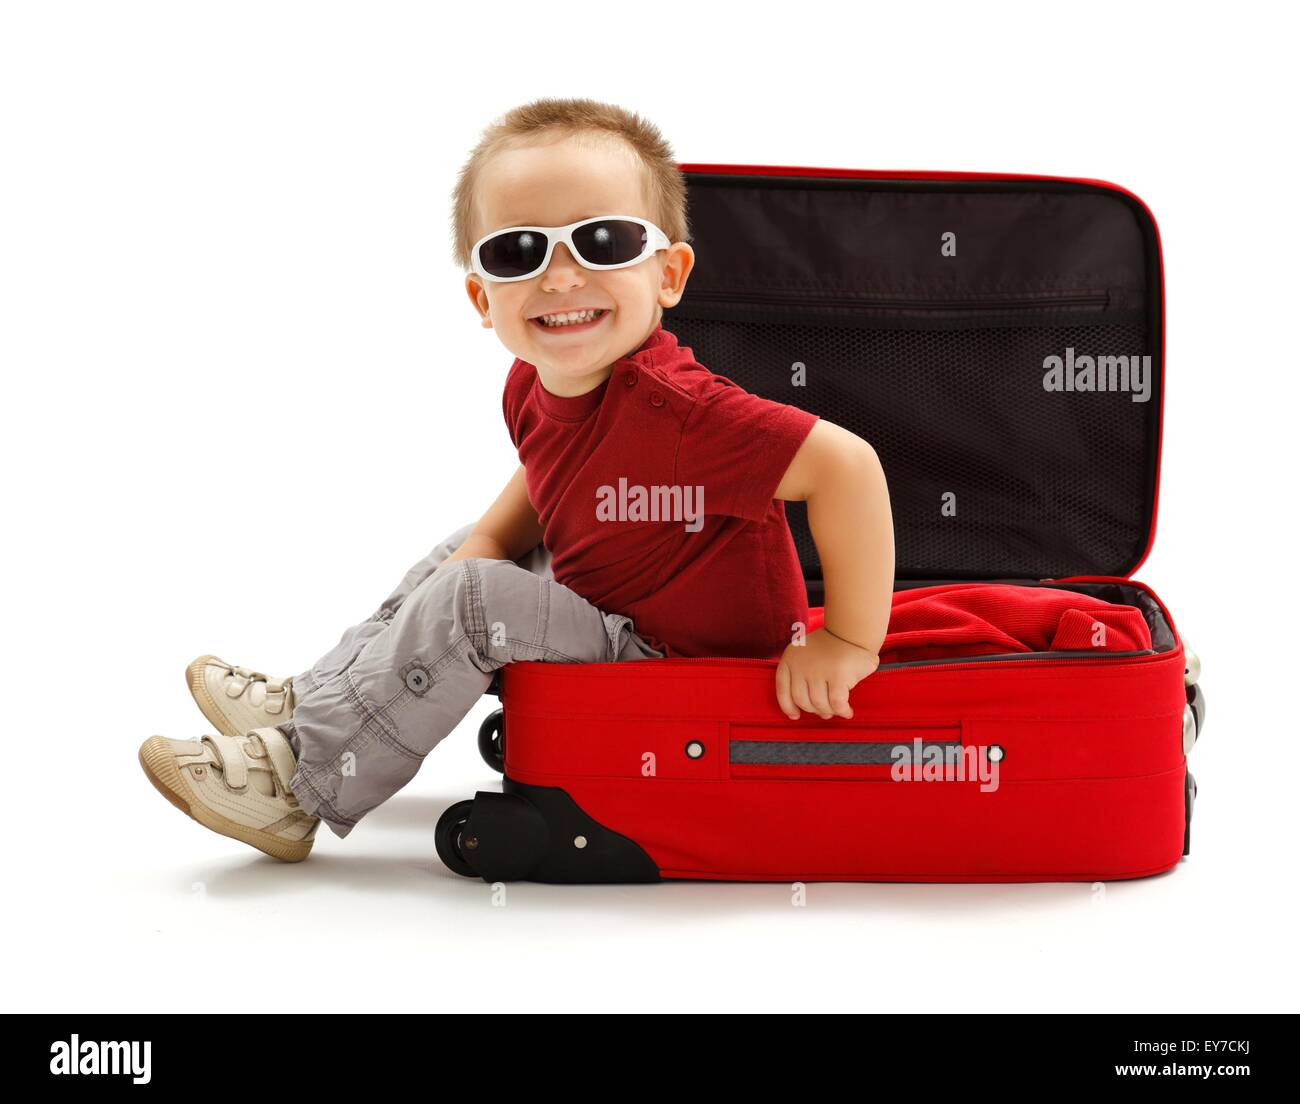 Playful little boy wearing sunglasses, sitting in red suitcase Stock Photo